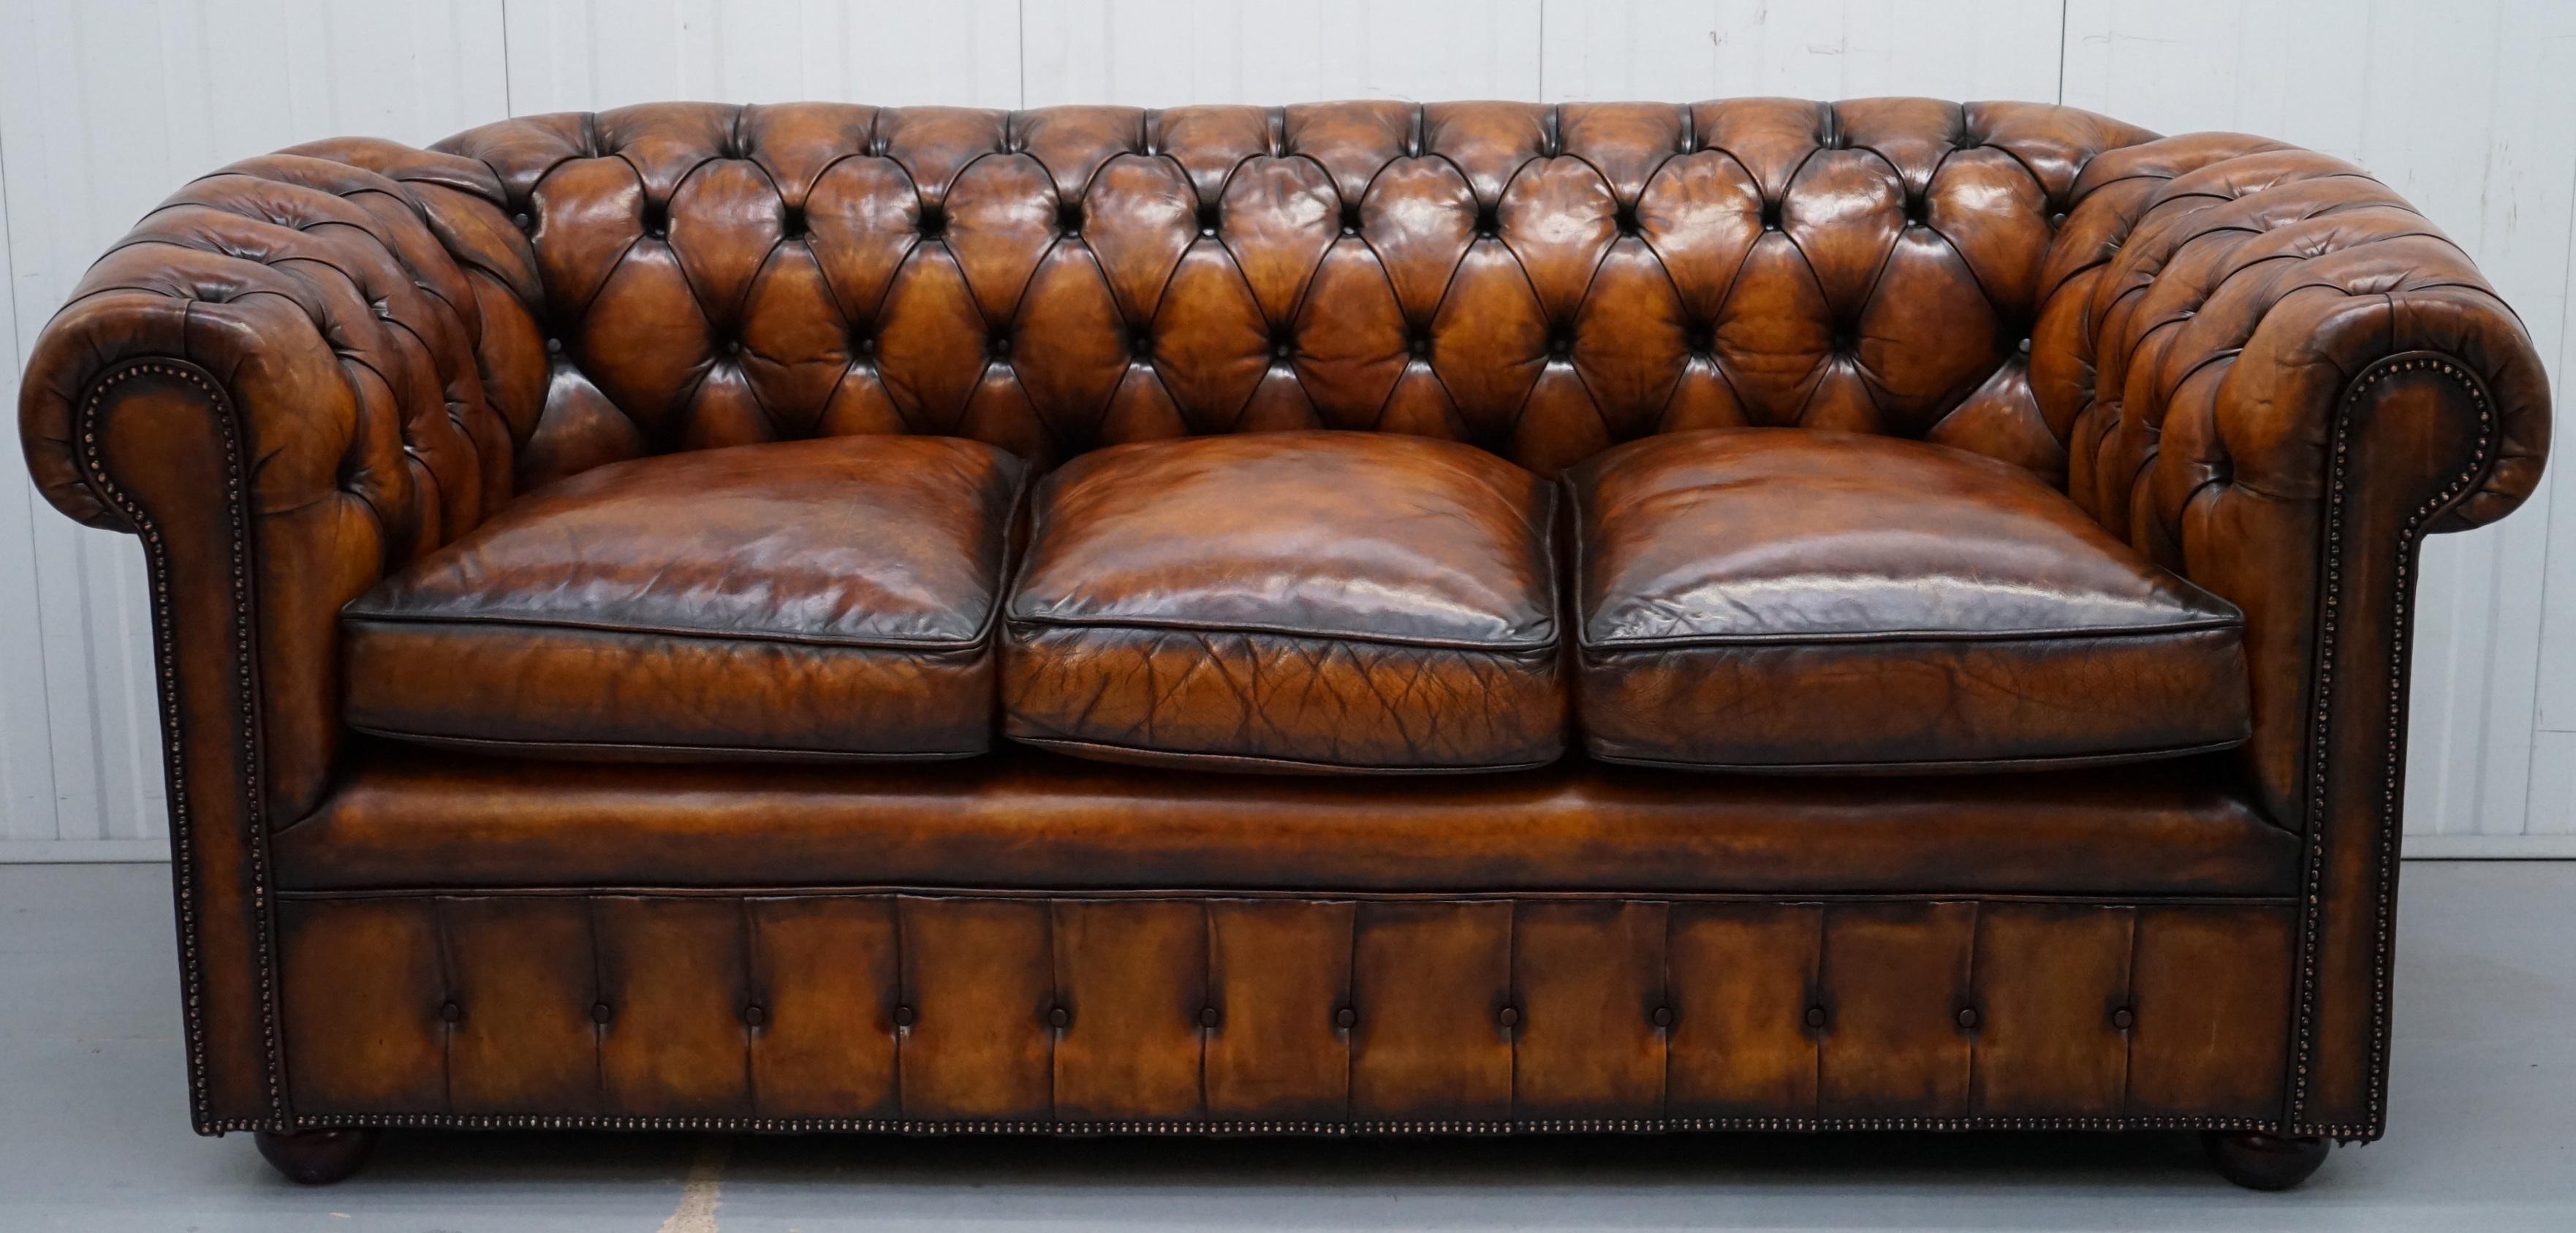 We are delighted to offer for auction this exceptionally rare original 1930’s Whisky brown leather Chesterfield club sofa in newly restored condition with feather filled cushions 

I have another of these exactly the same which will be finished in